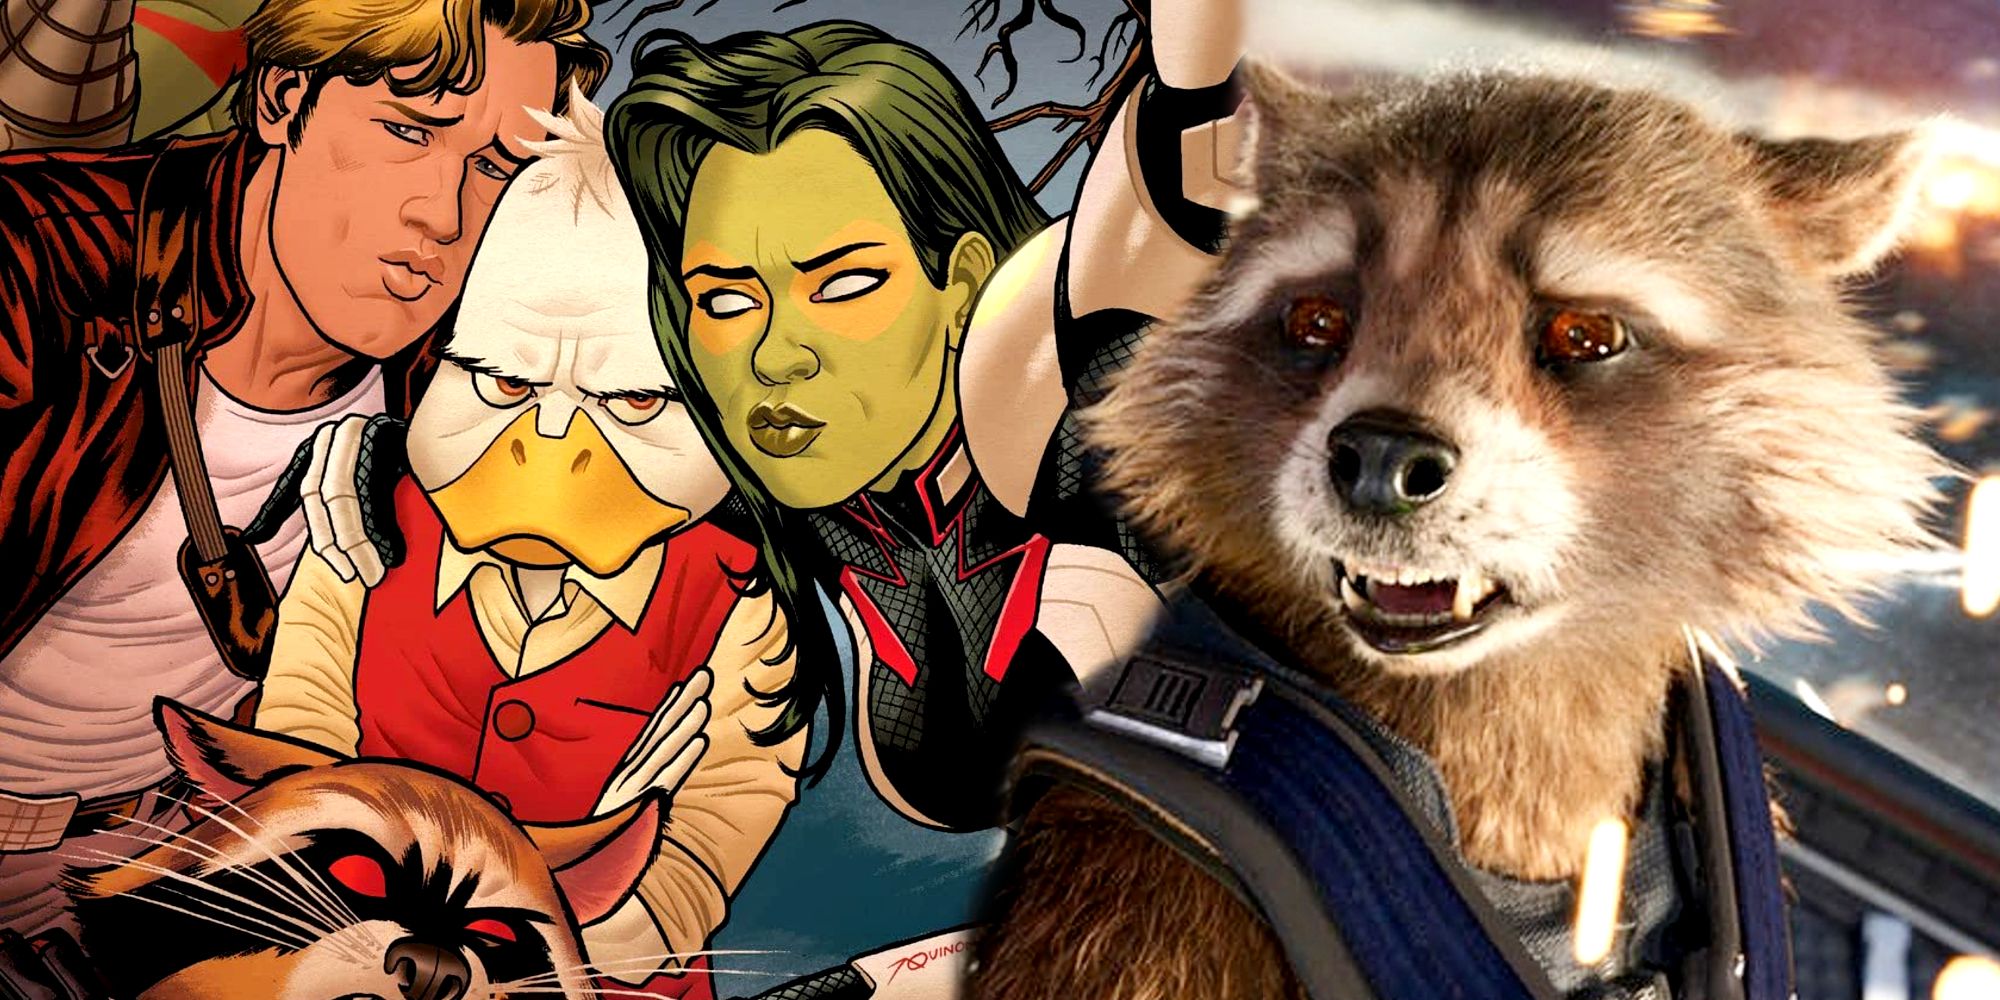 Howard the Duck with Rocket Raccoon and the Guardians of the Galaxy